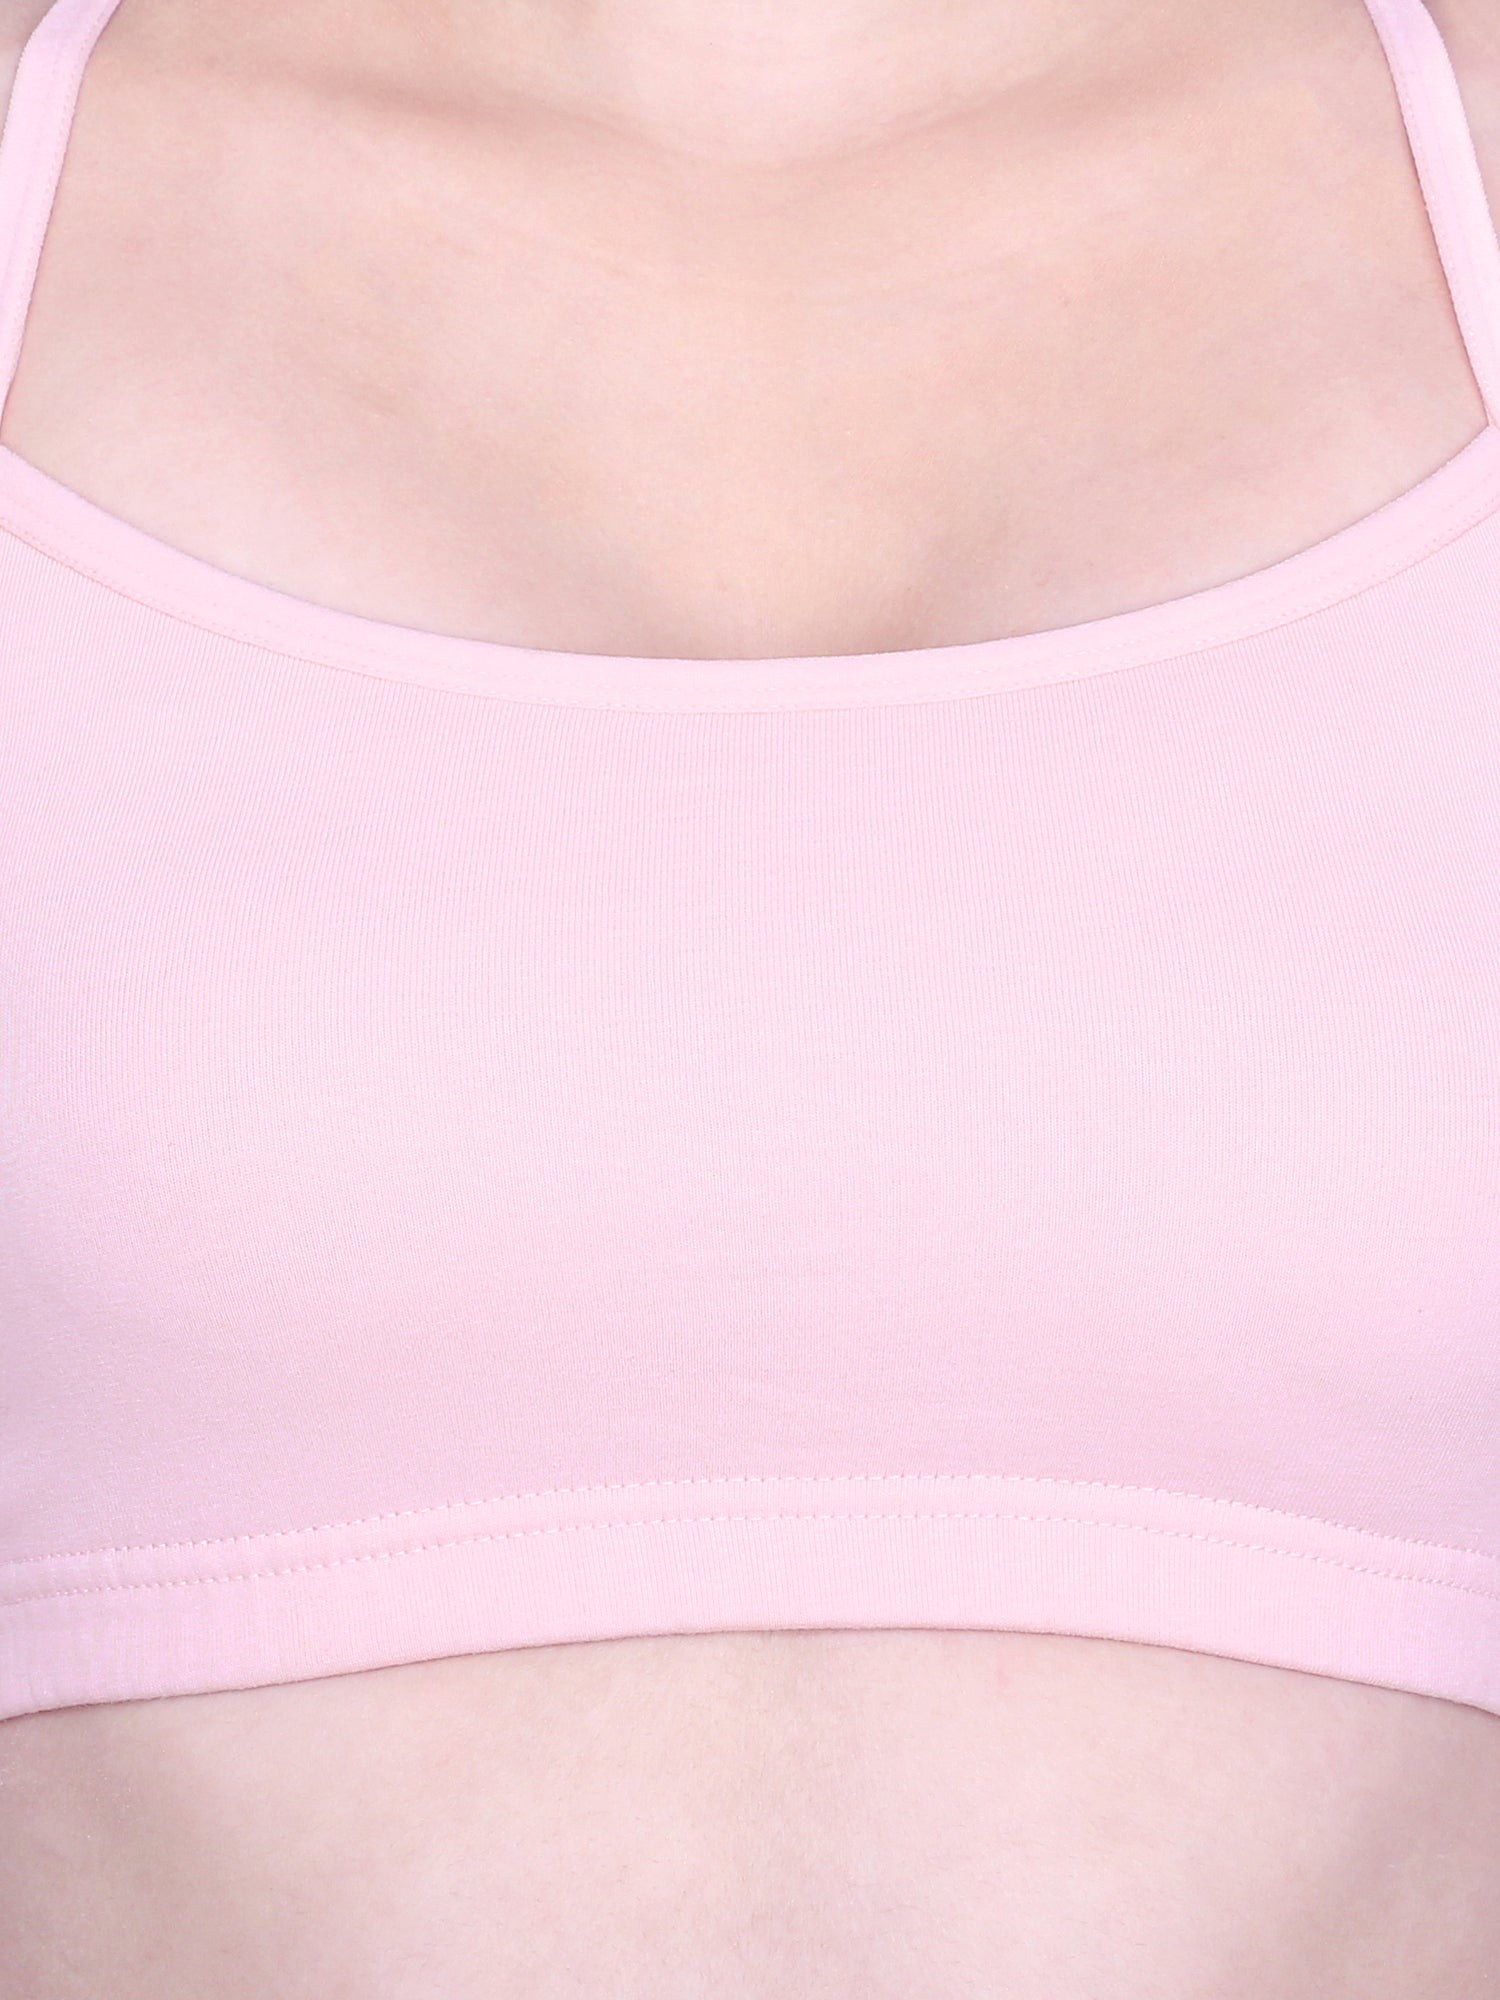 Teenager cotton Sports bras for women's in different sizes and colors –  INKURV